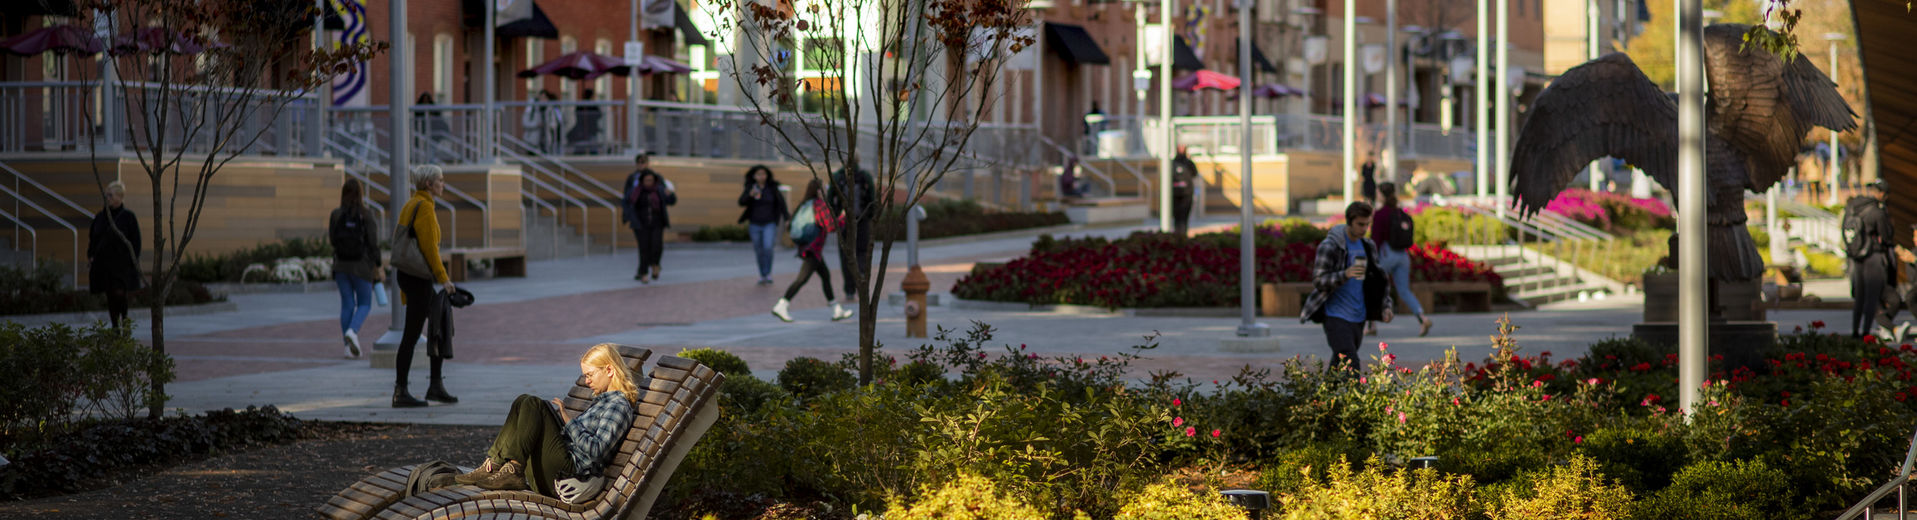 Students walking through O'Connor Plaza on a sunny fall day.